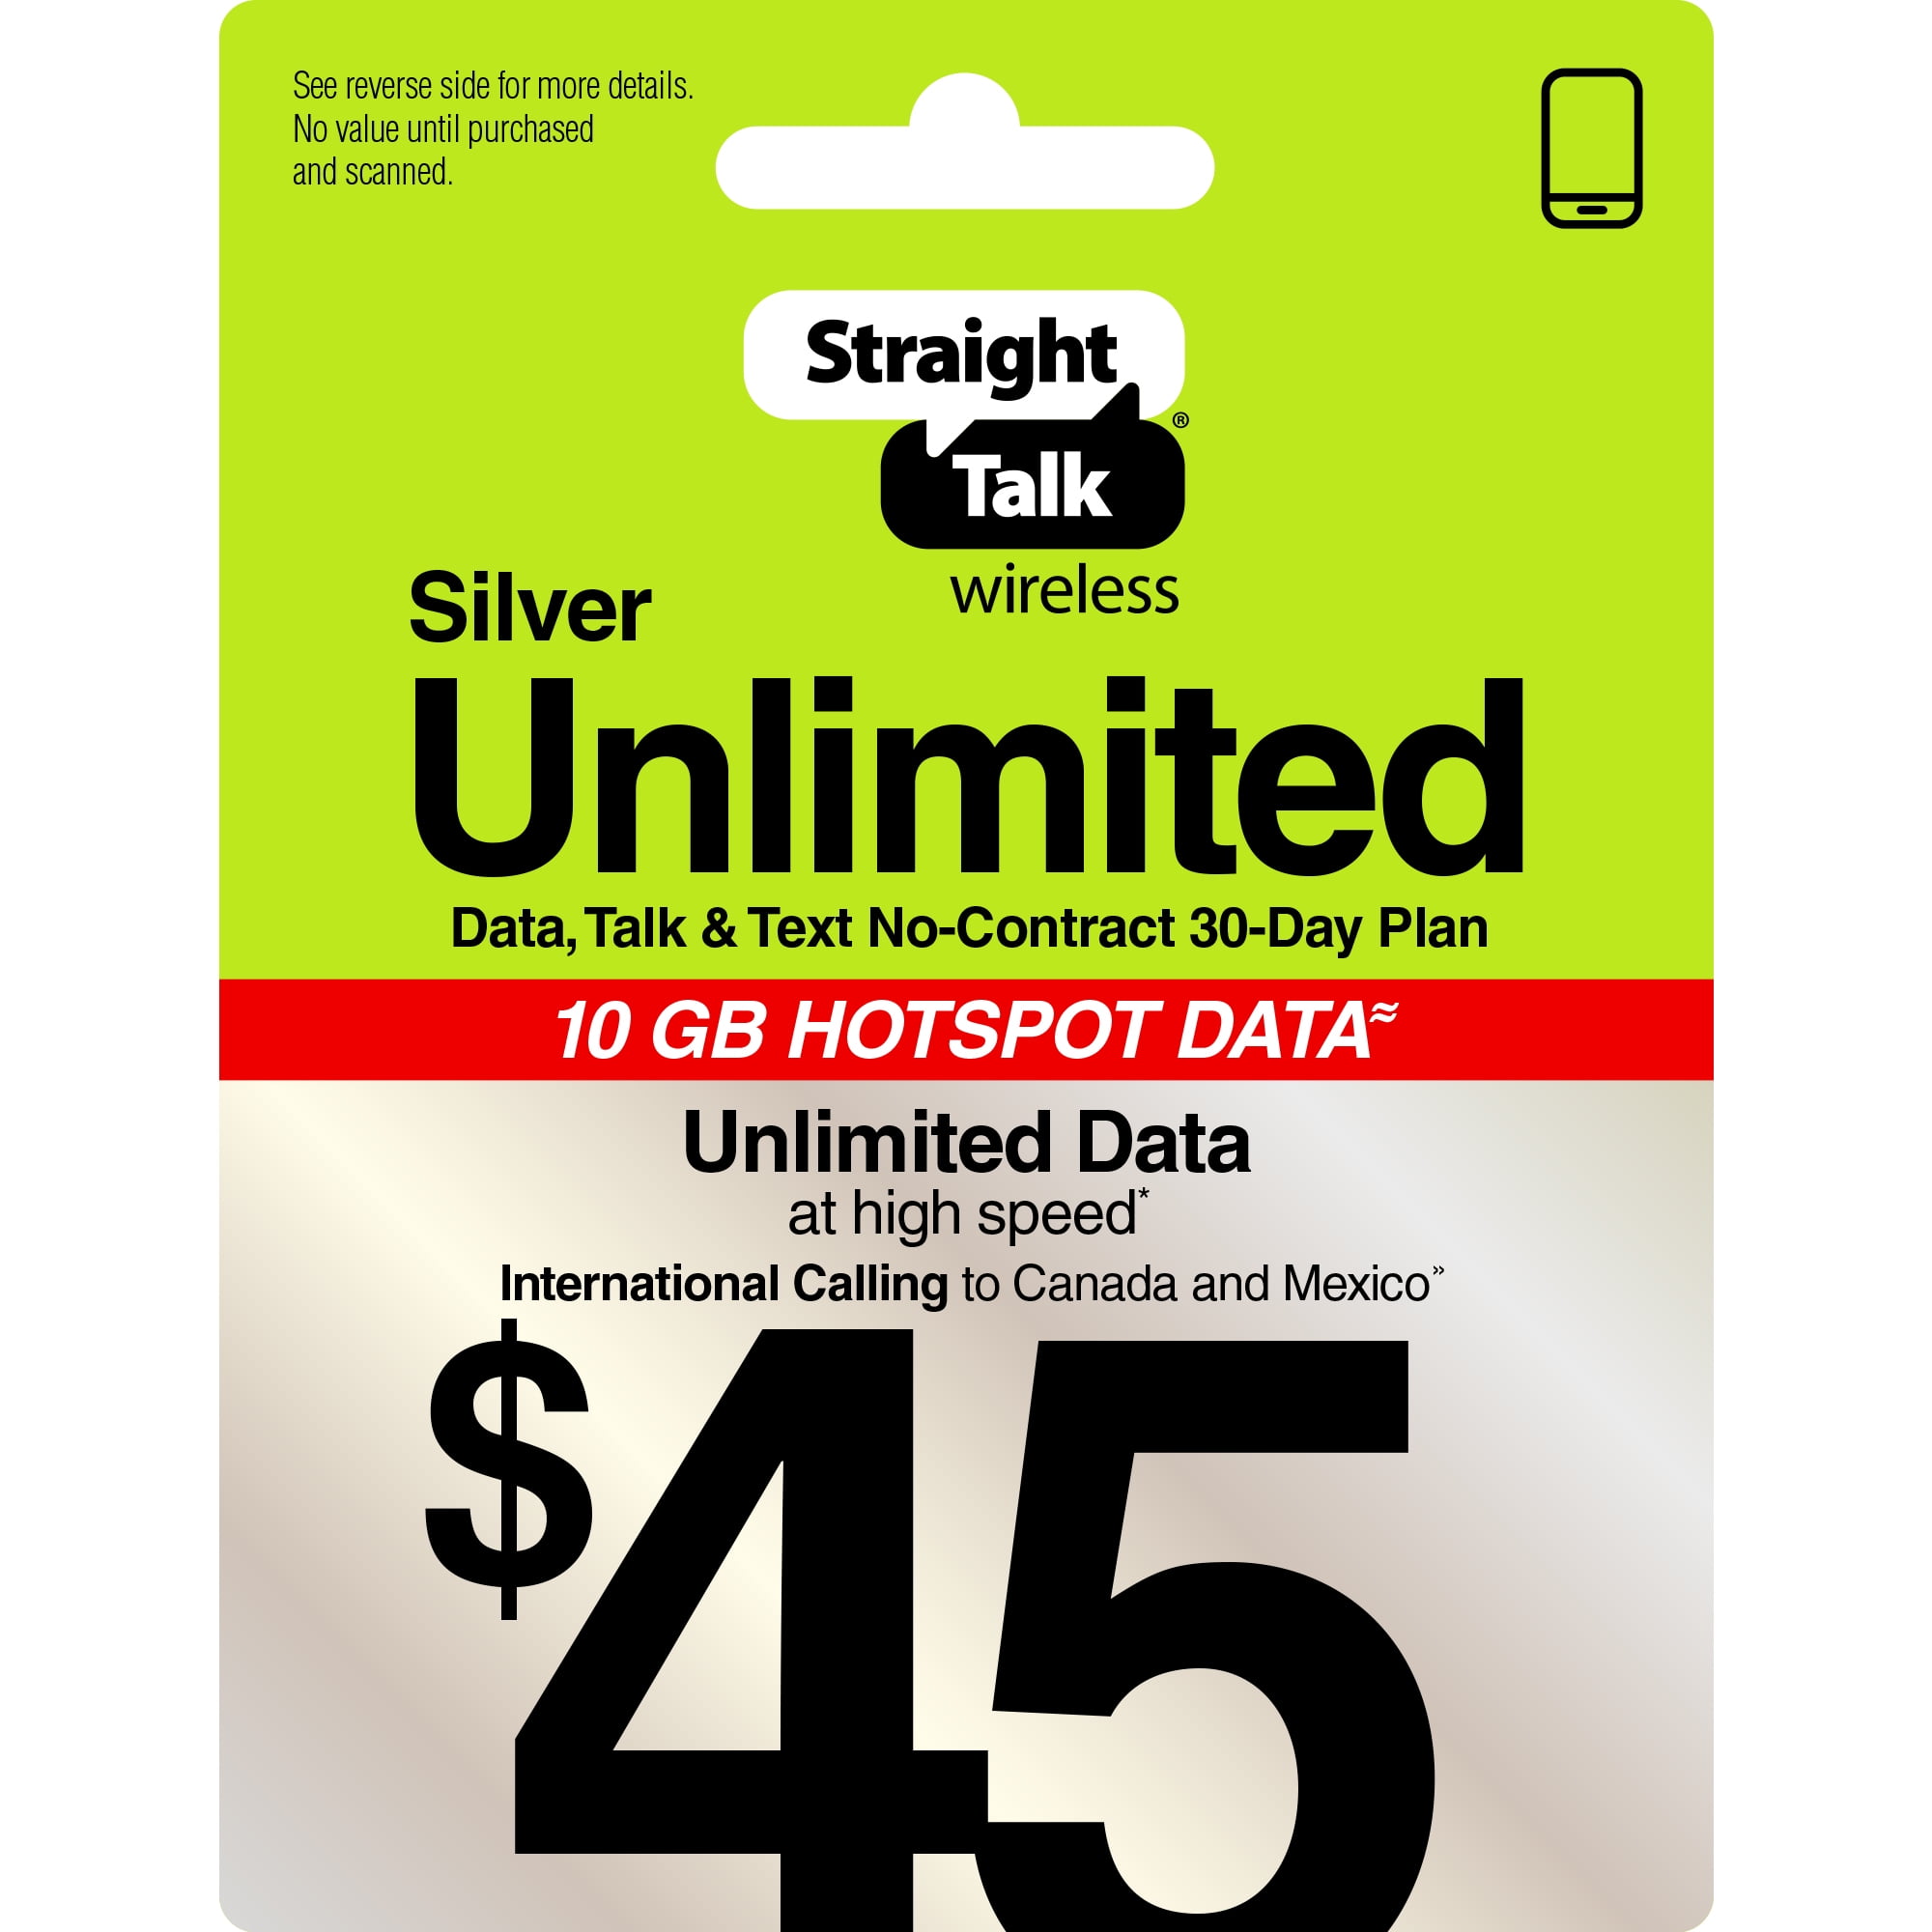 Straight Talk $45 Silver Unlimited Up Int\'l Hotspot Top 30-Day Prepaid (Email Calling Plan + Delivery) e-PIN Data +10GB